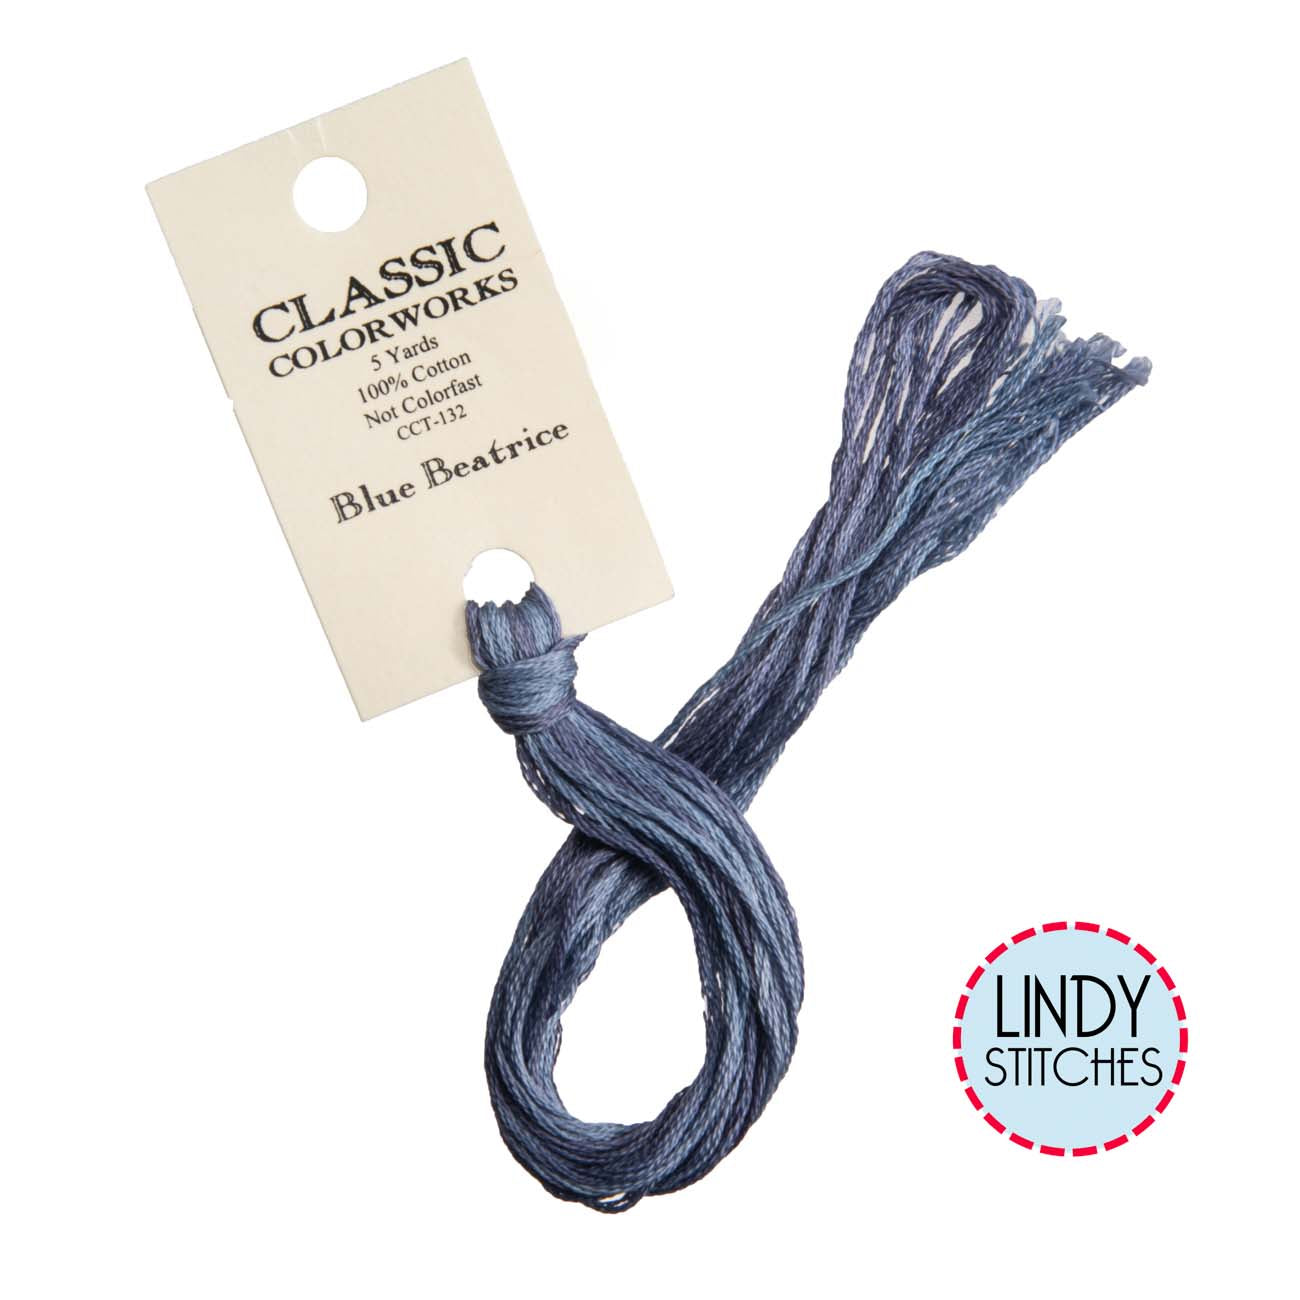 Blue Beatrice Classic Colorworks Floss Hand Dyed Cotton Skein